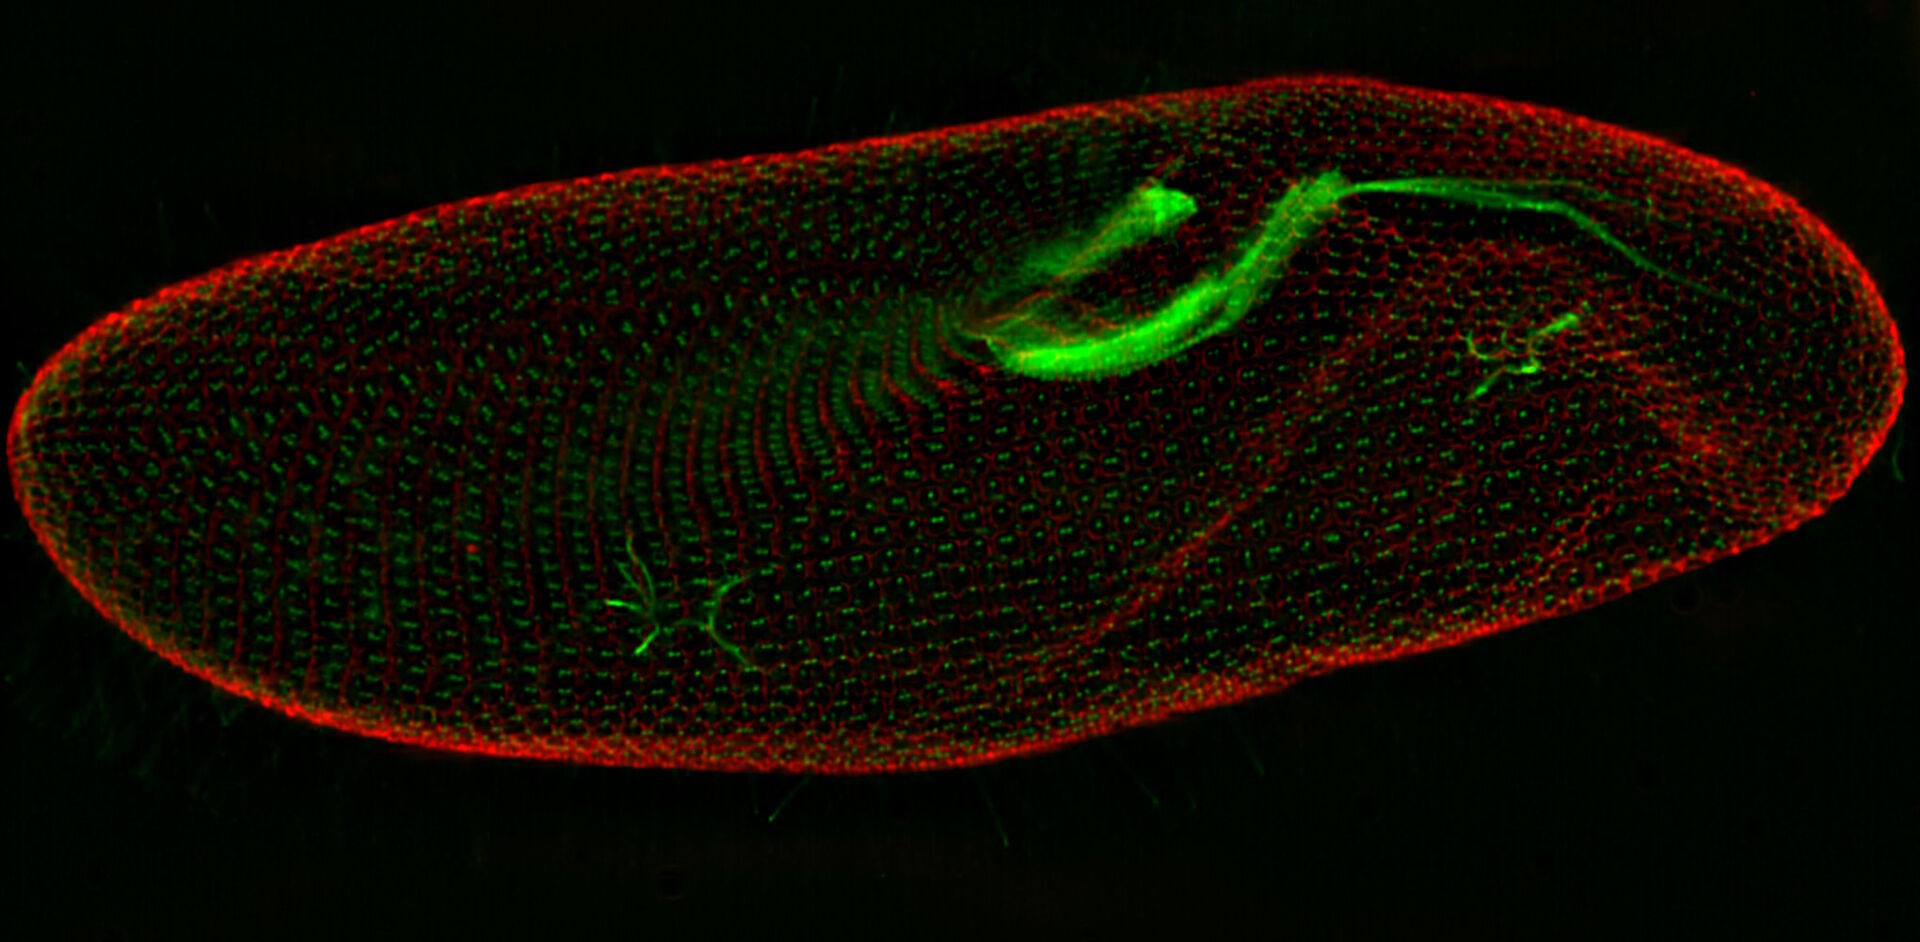 Widefield fluorescence microscope image of a paramecium after computational clearing.